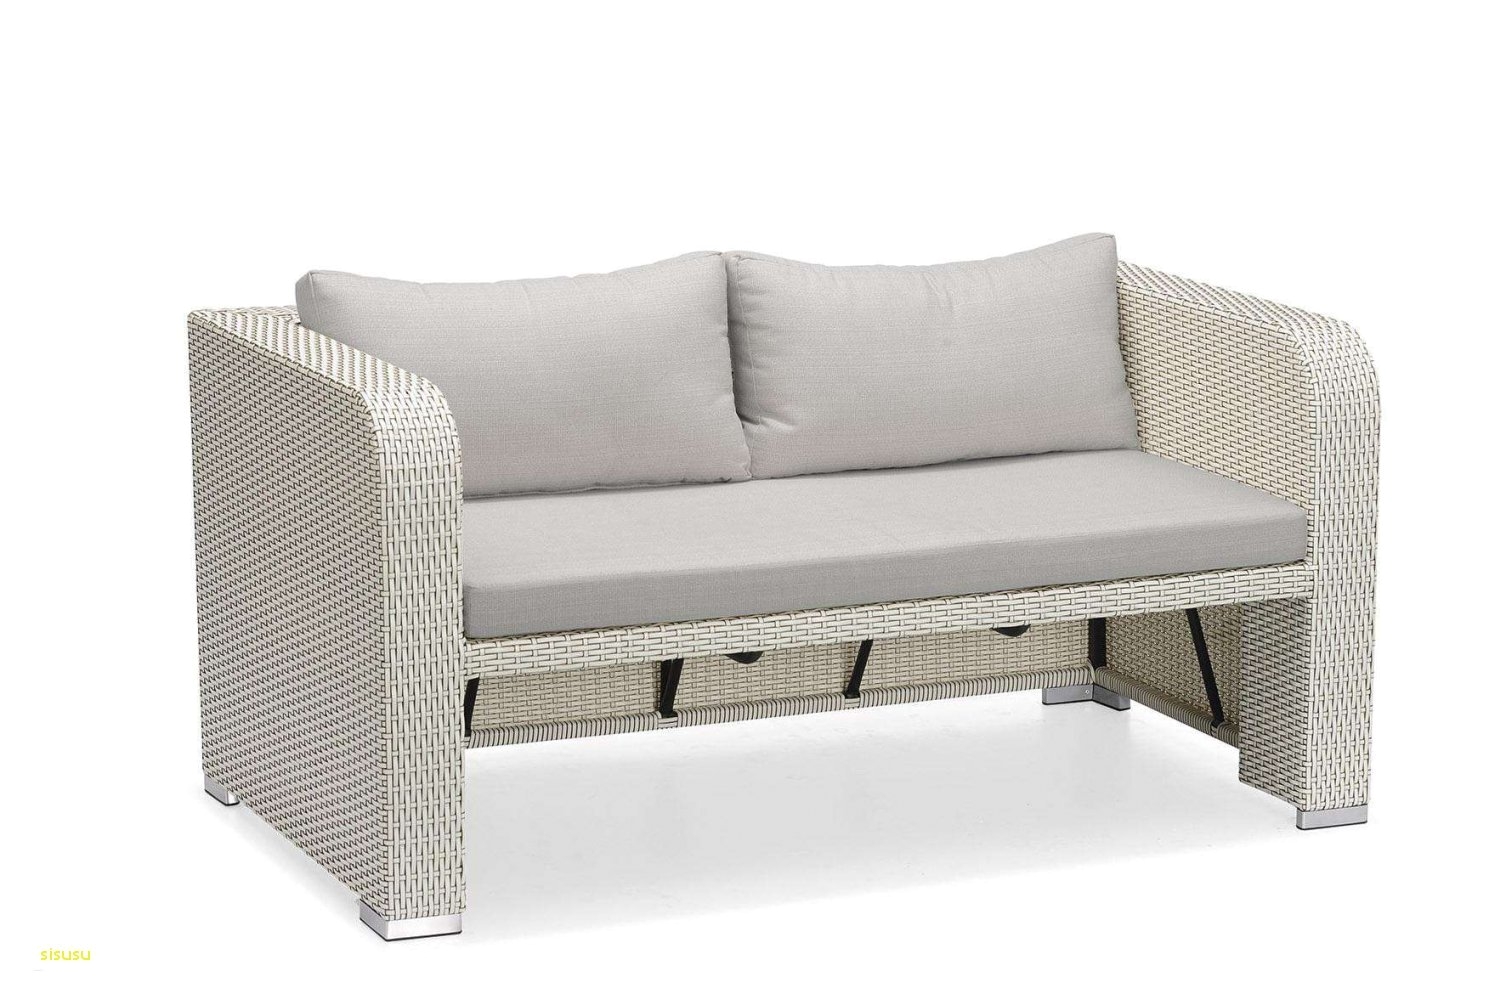 wicker sectional patio furniture awesome furniture outdoor loveseat elegant wicker outdoor sofa 0d patio